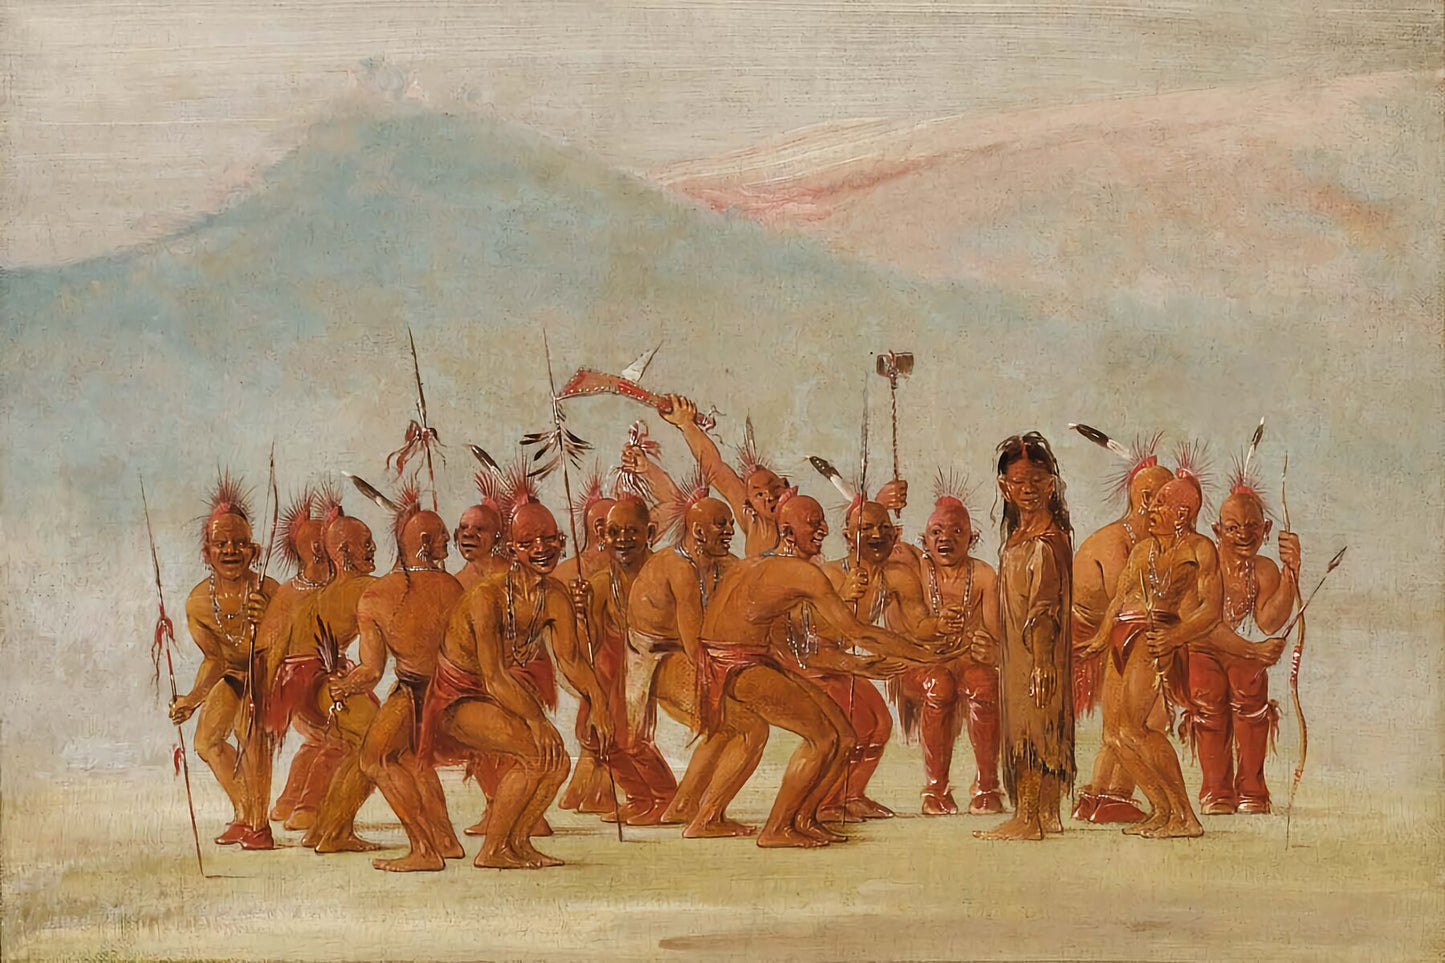 Dance to the Berdash by George Catlin - 1835-1837